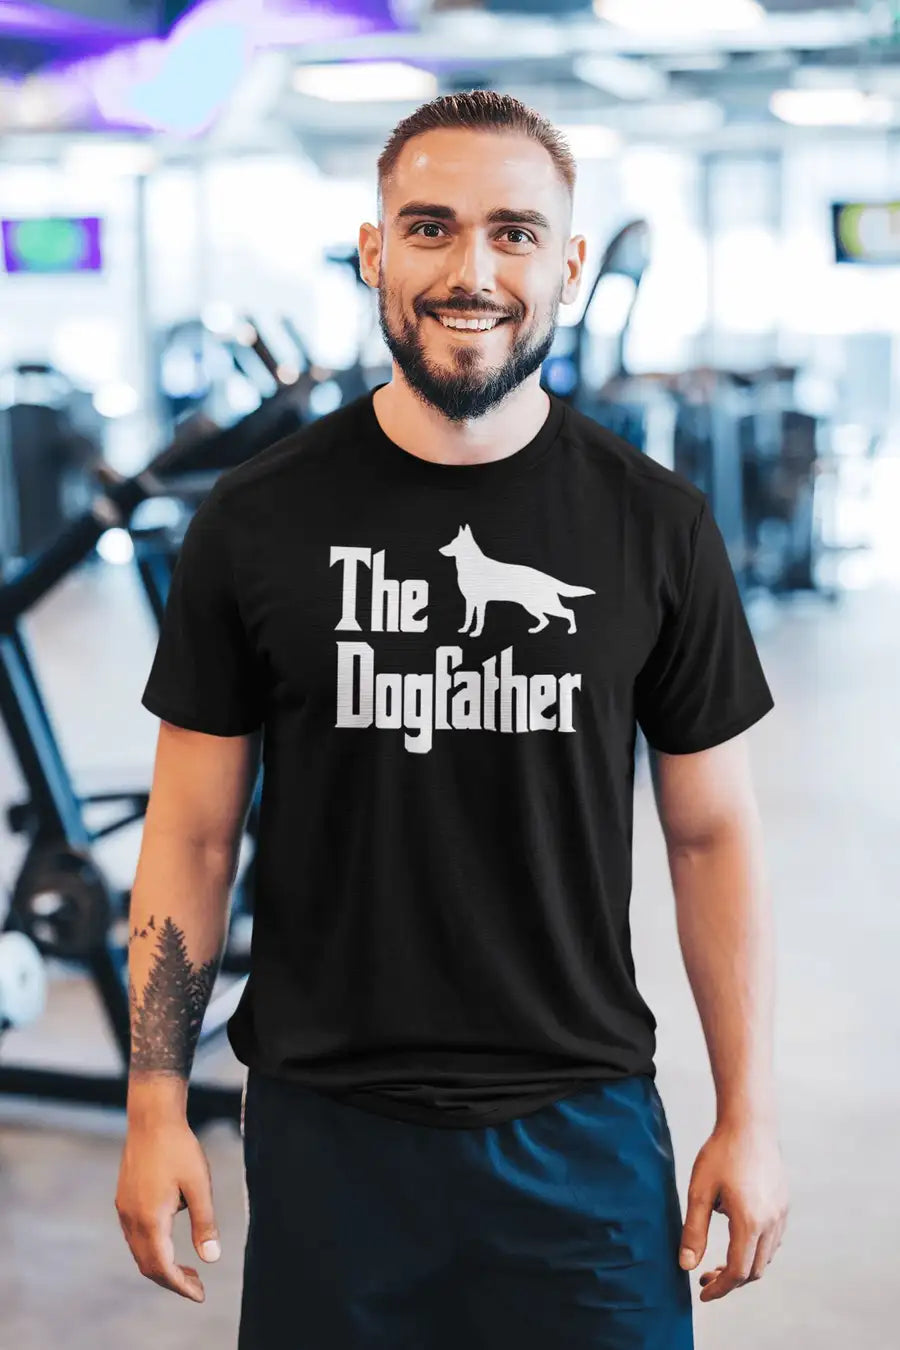 The DogFather Exclusive T Shirt for Men | Premium Design | Catch My Drift India - Catch My Drift India Clothing black, clothing, dog, made in india, shirt, t shirt, tshirt